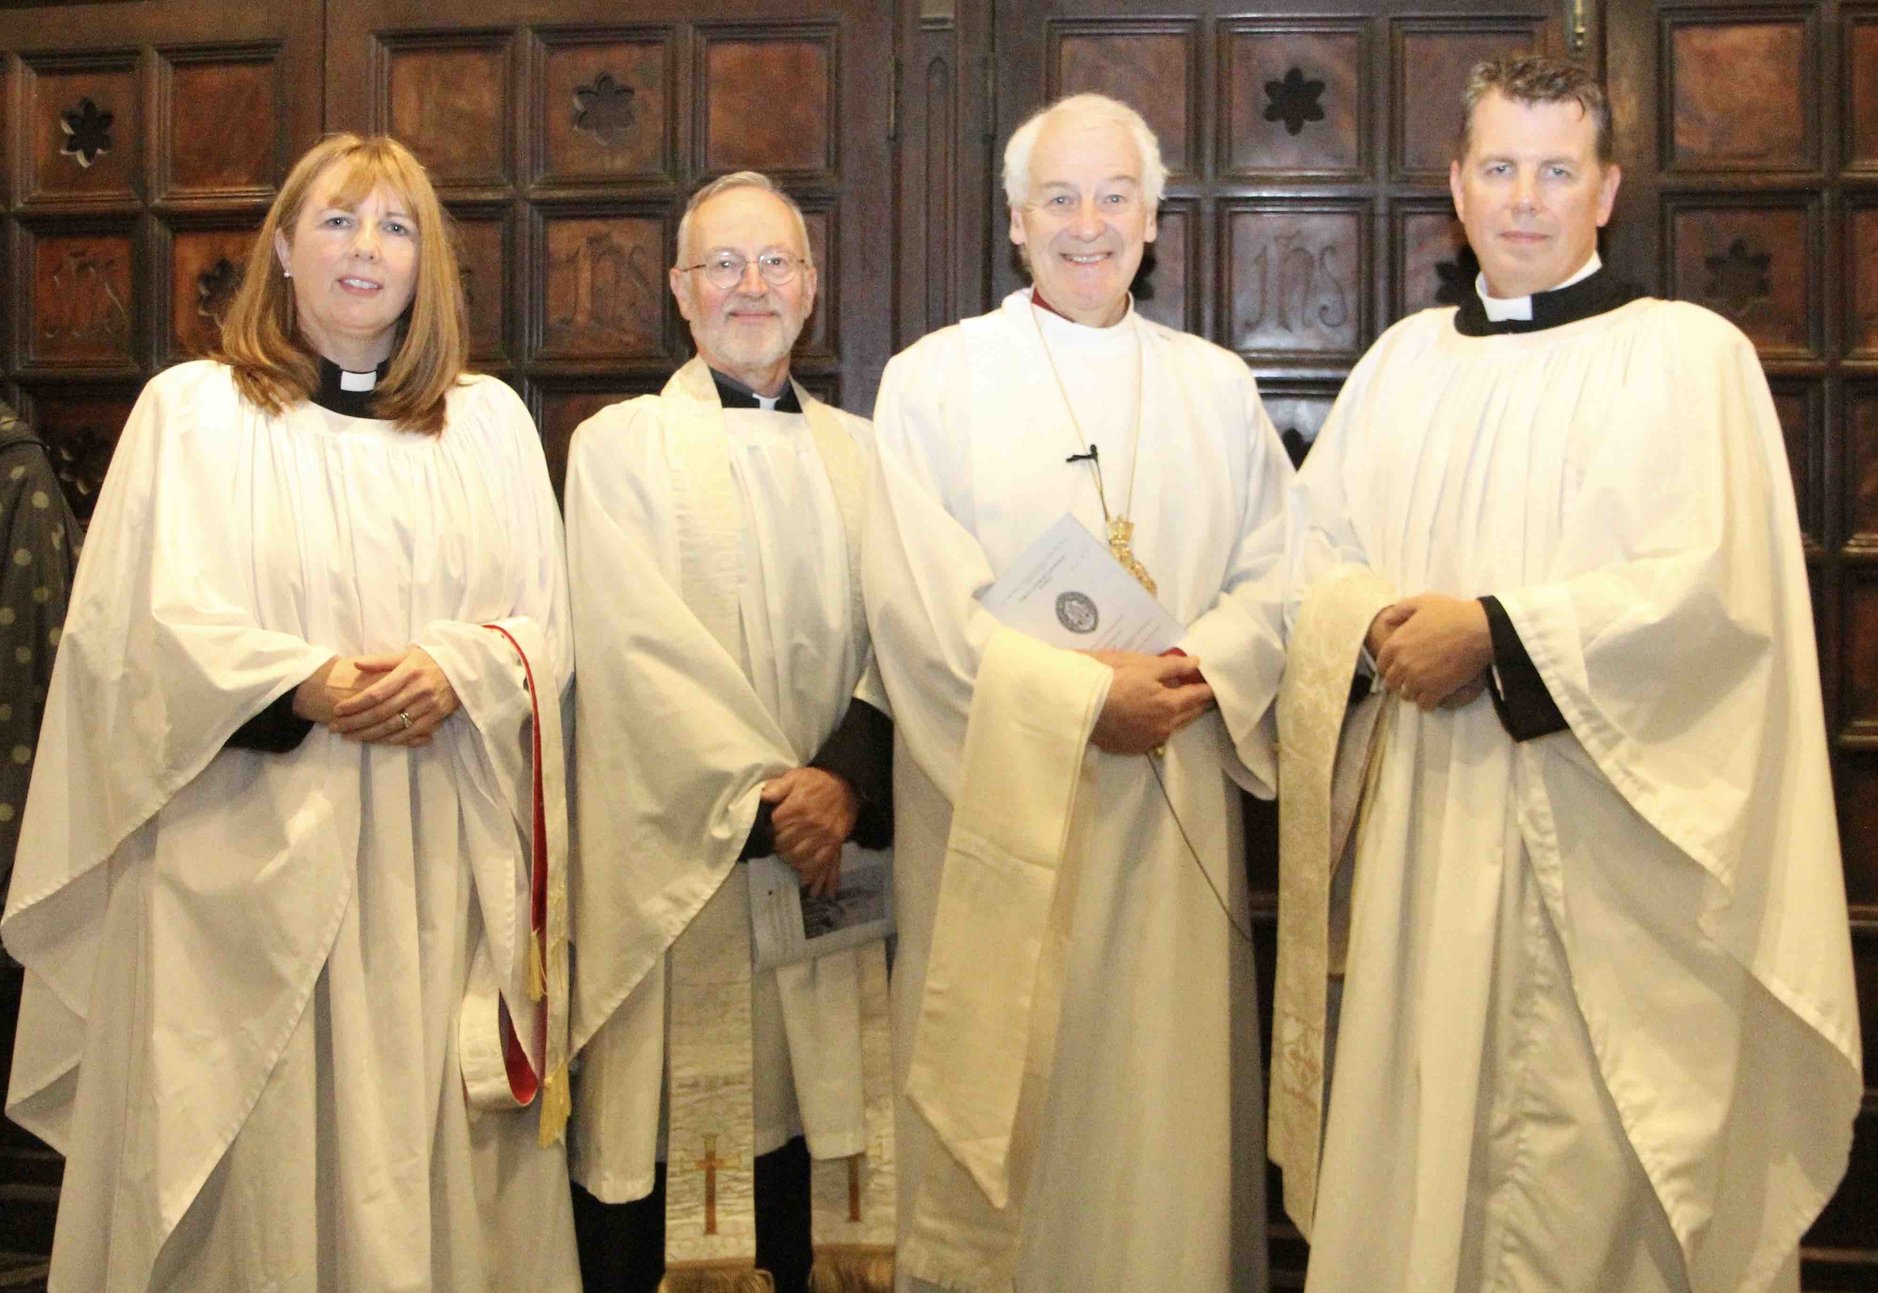 “Your role is one of humble service” – Ordination of Deacons in Dublin and Glendalough